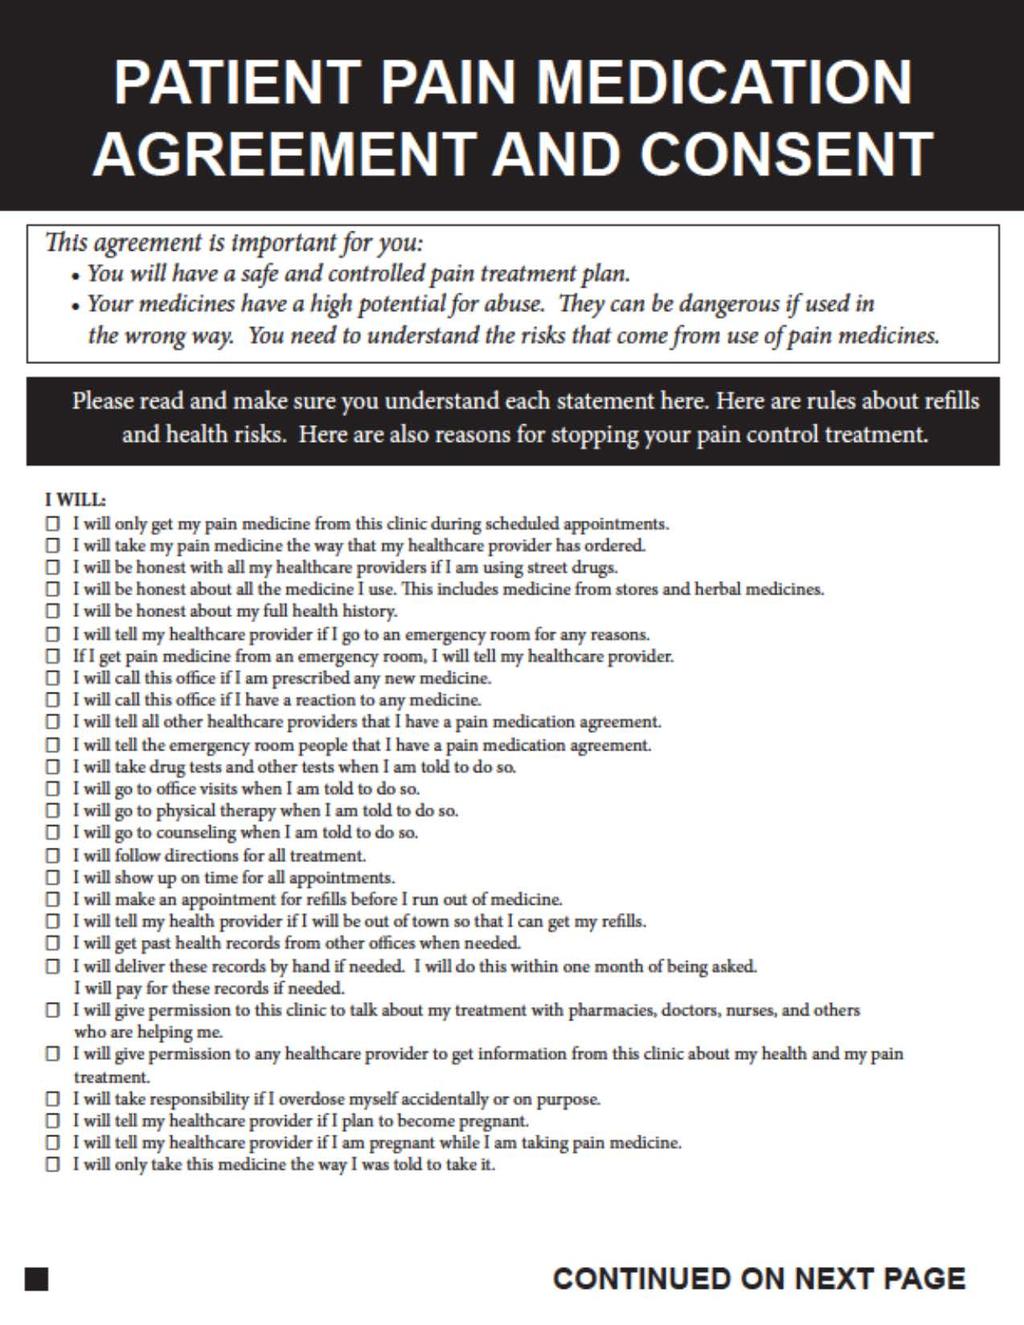 Appendix 13 Suggested Patient Pain Medication Agreement and Consent